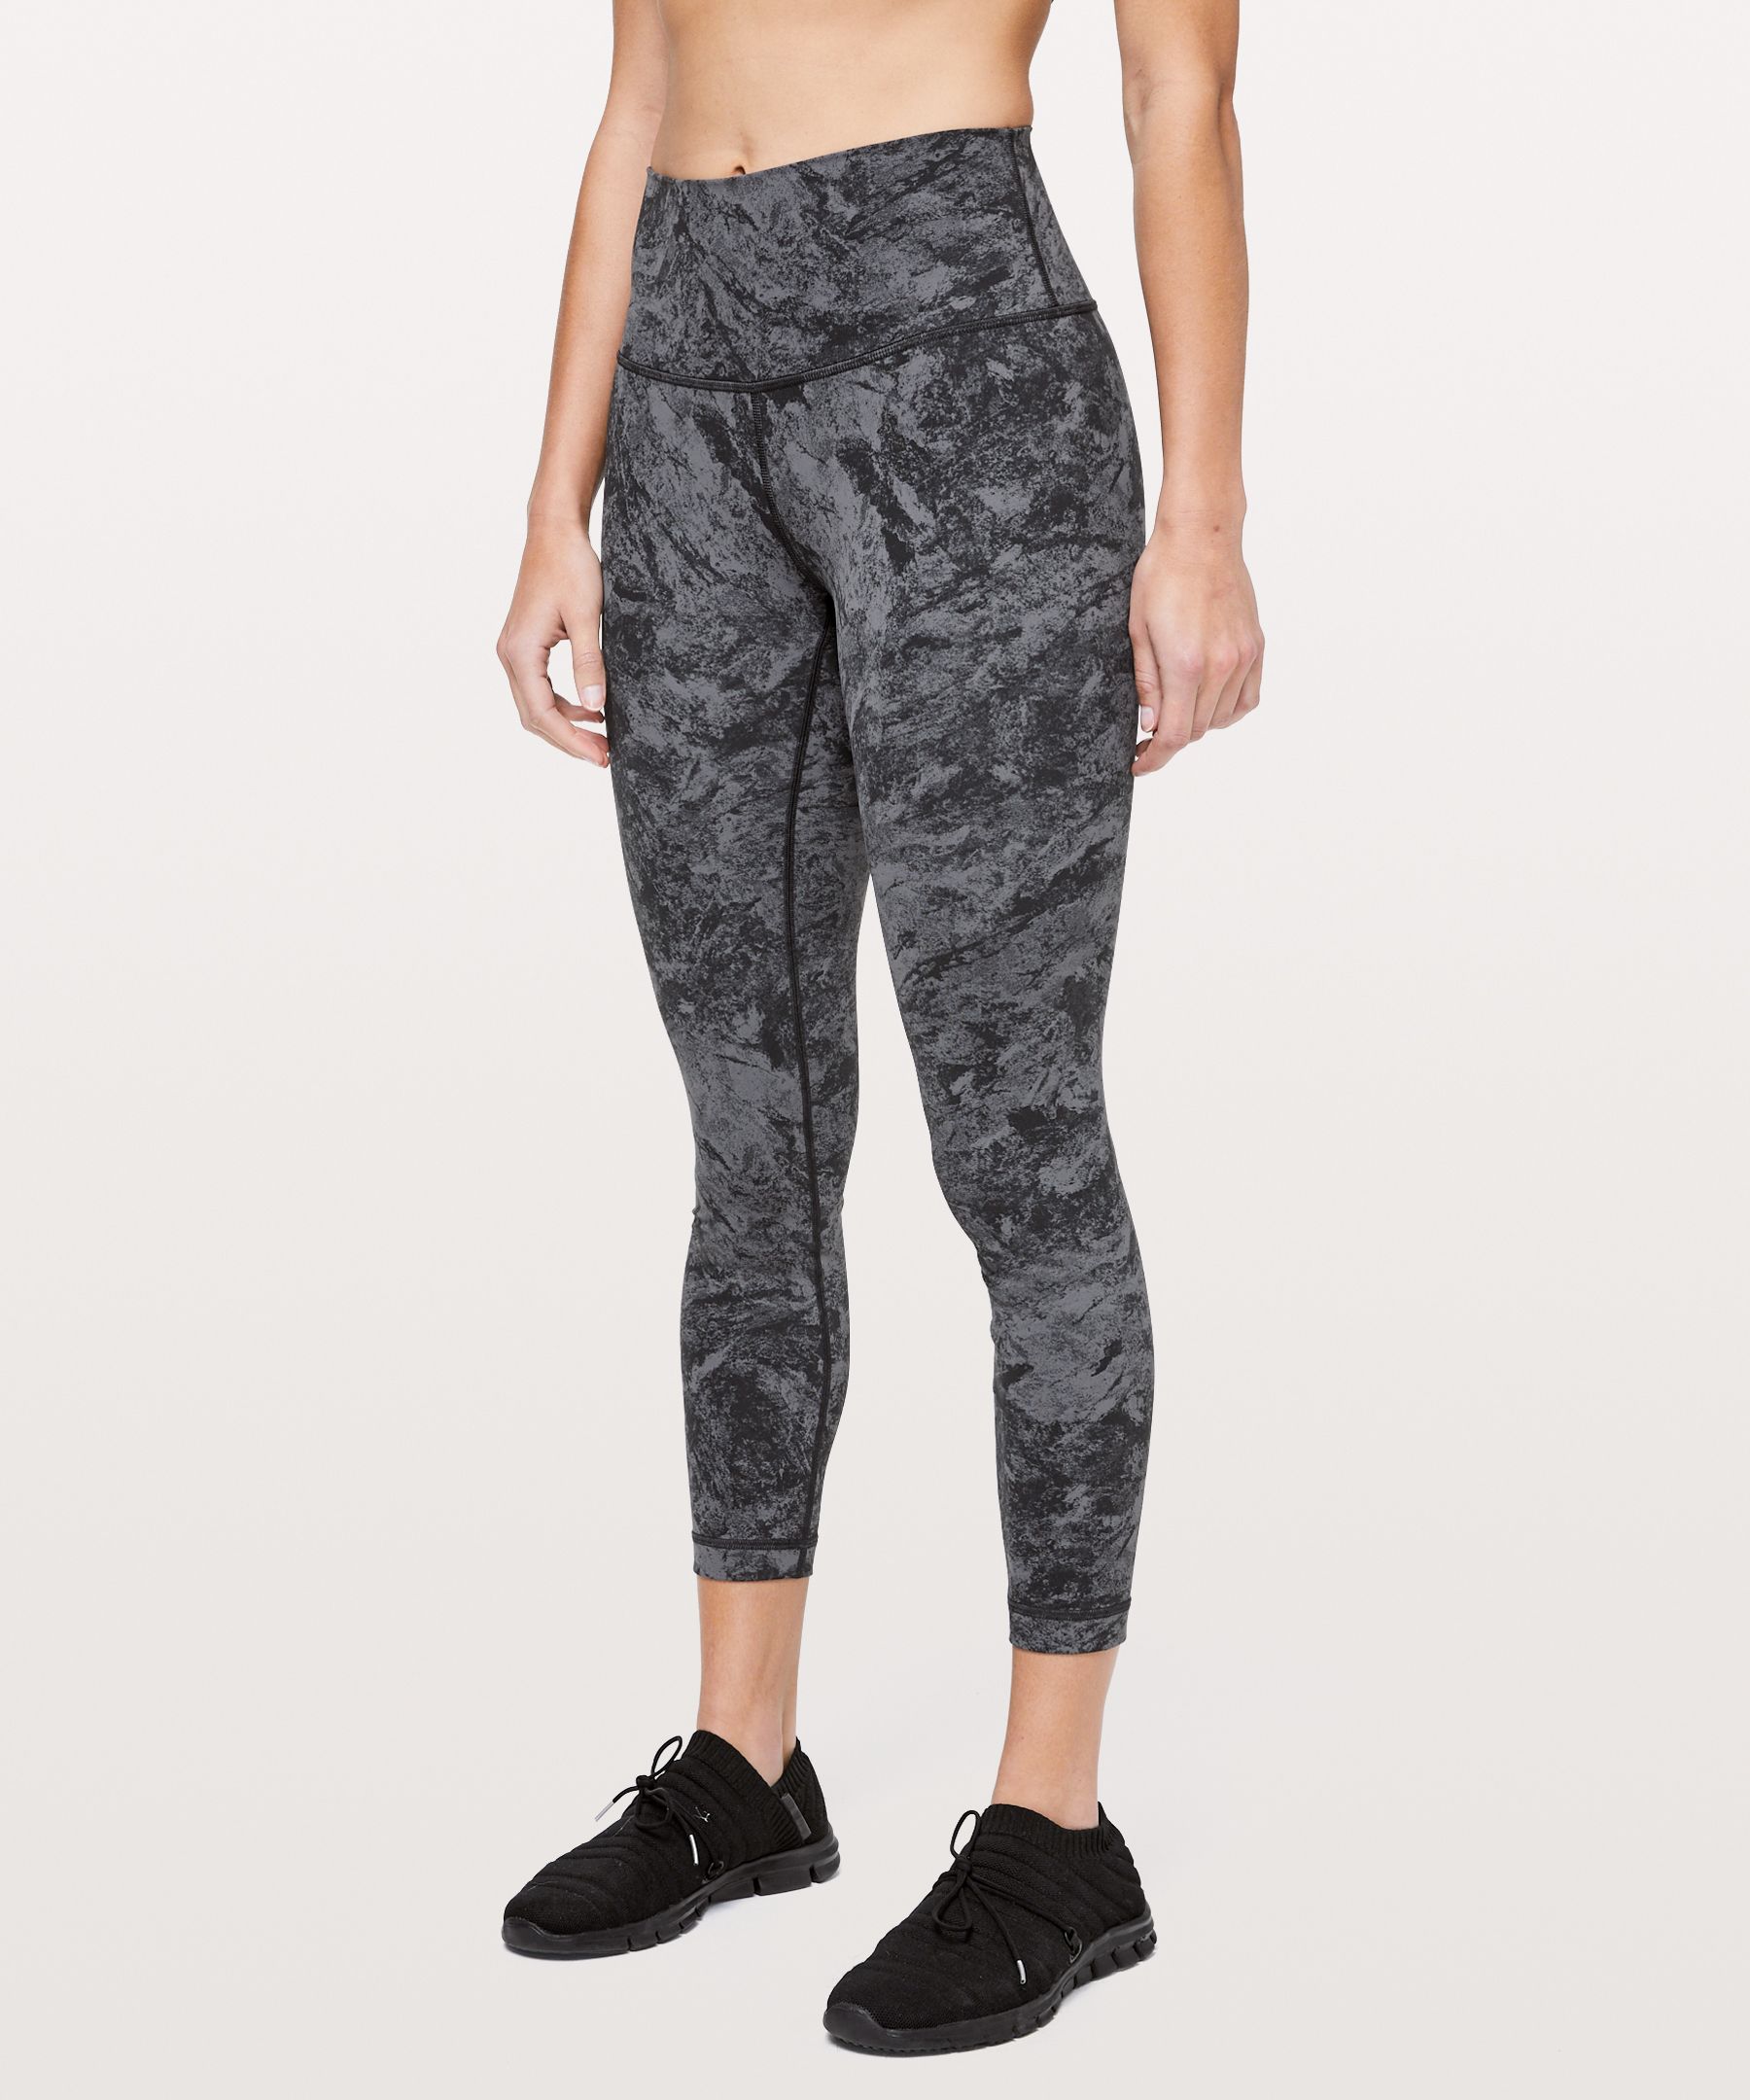 Lululemon Wunder Under High-rise Tight 25" *full-on Luxtreme In Washed Marble Titanium Deep Coal